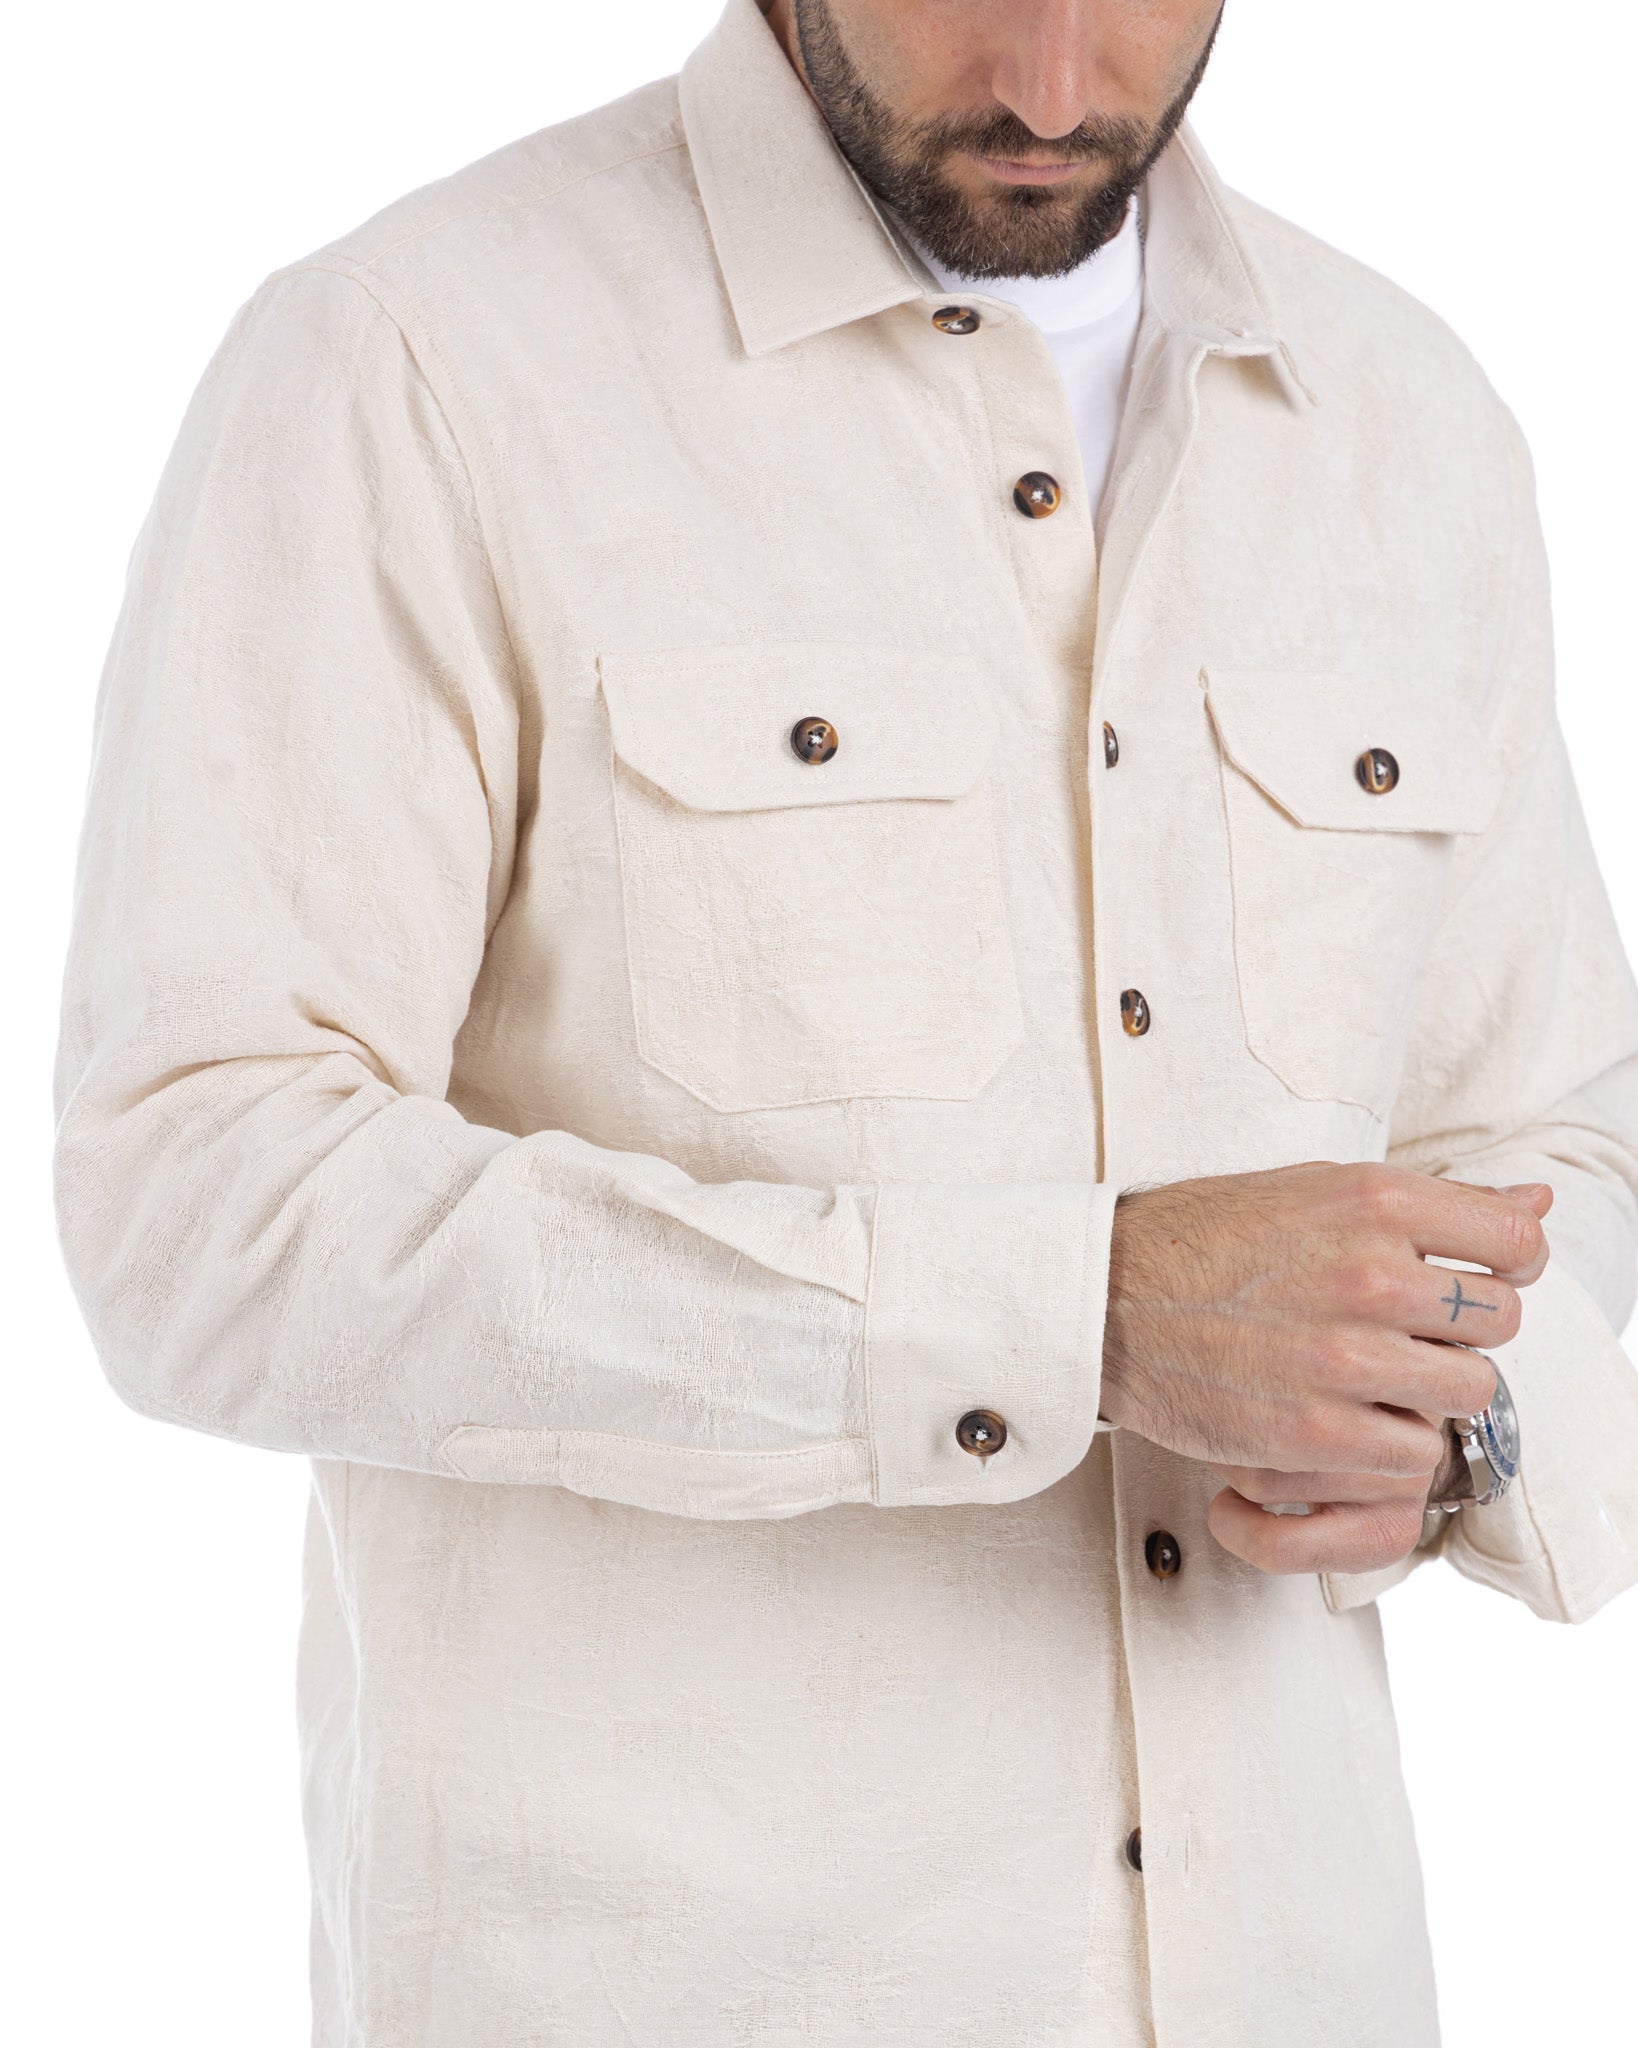 Bahama - cream shirt with relief pattern